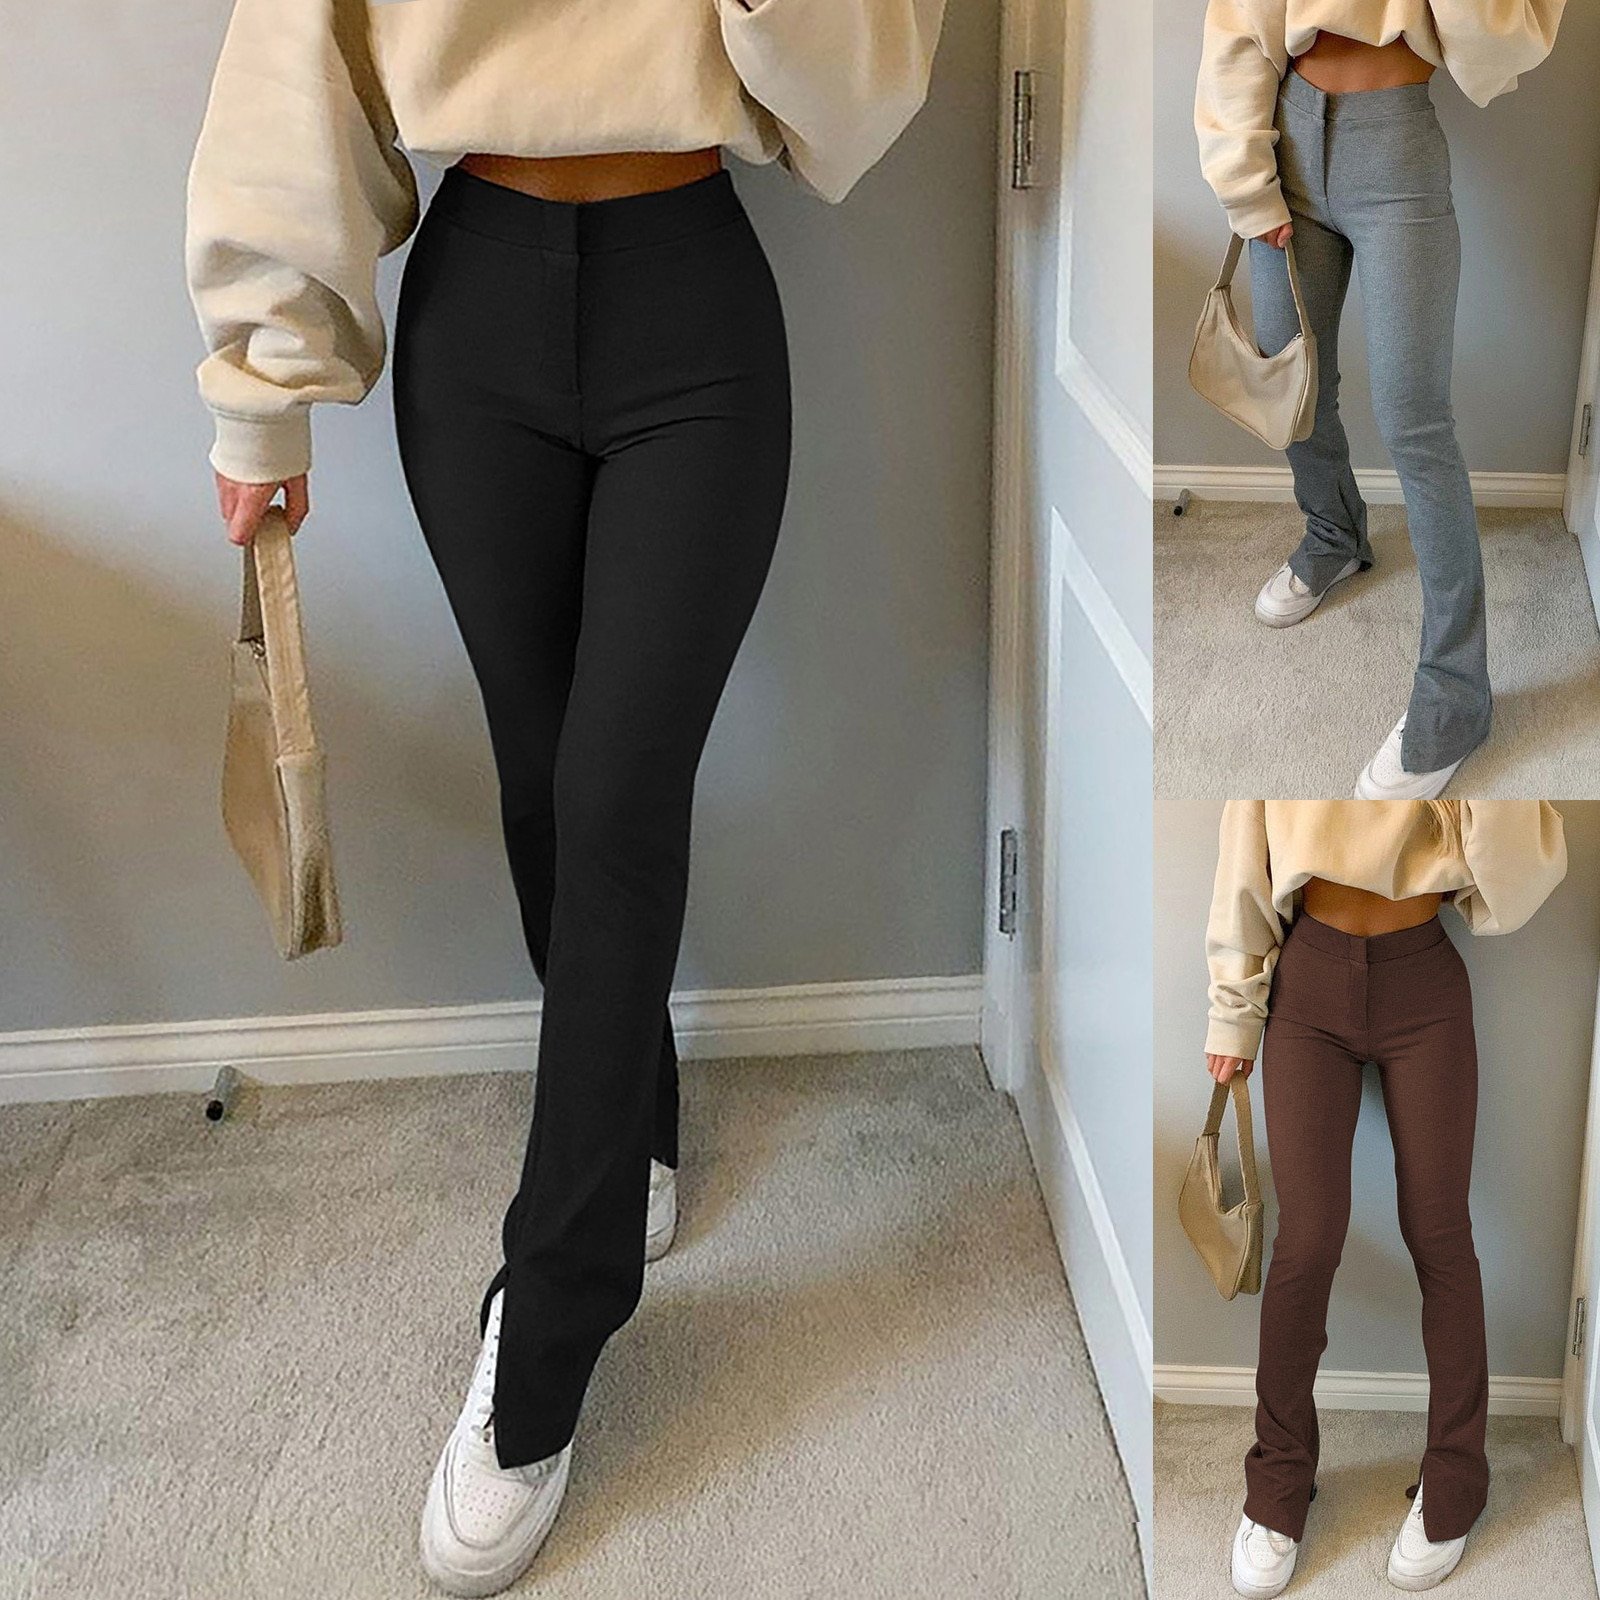 Women Pants 2021 New Fashion And Casual Solid Color Slim-fit Trousers Slit Pockets High-waisted Skinny Sweatpants брюки женские